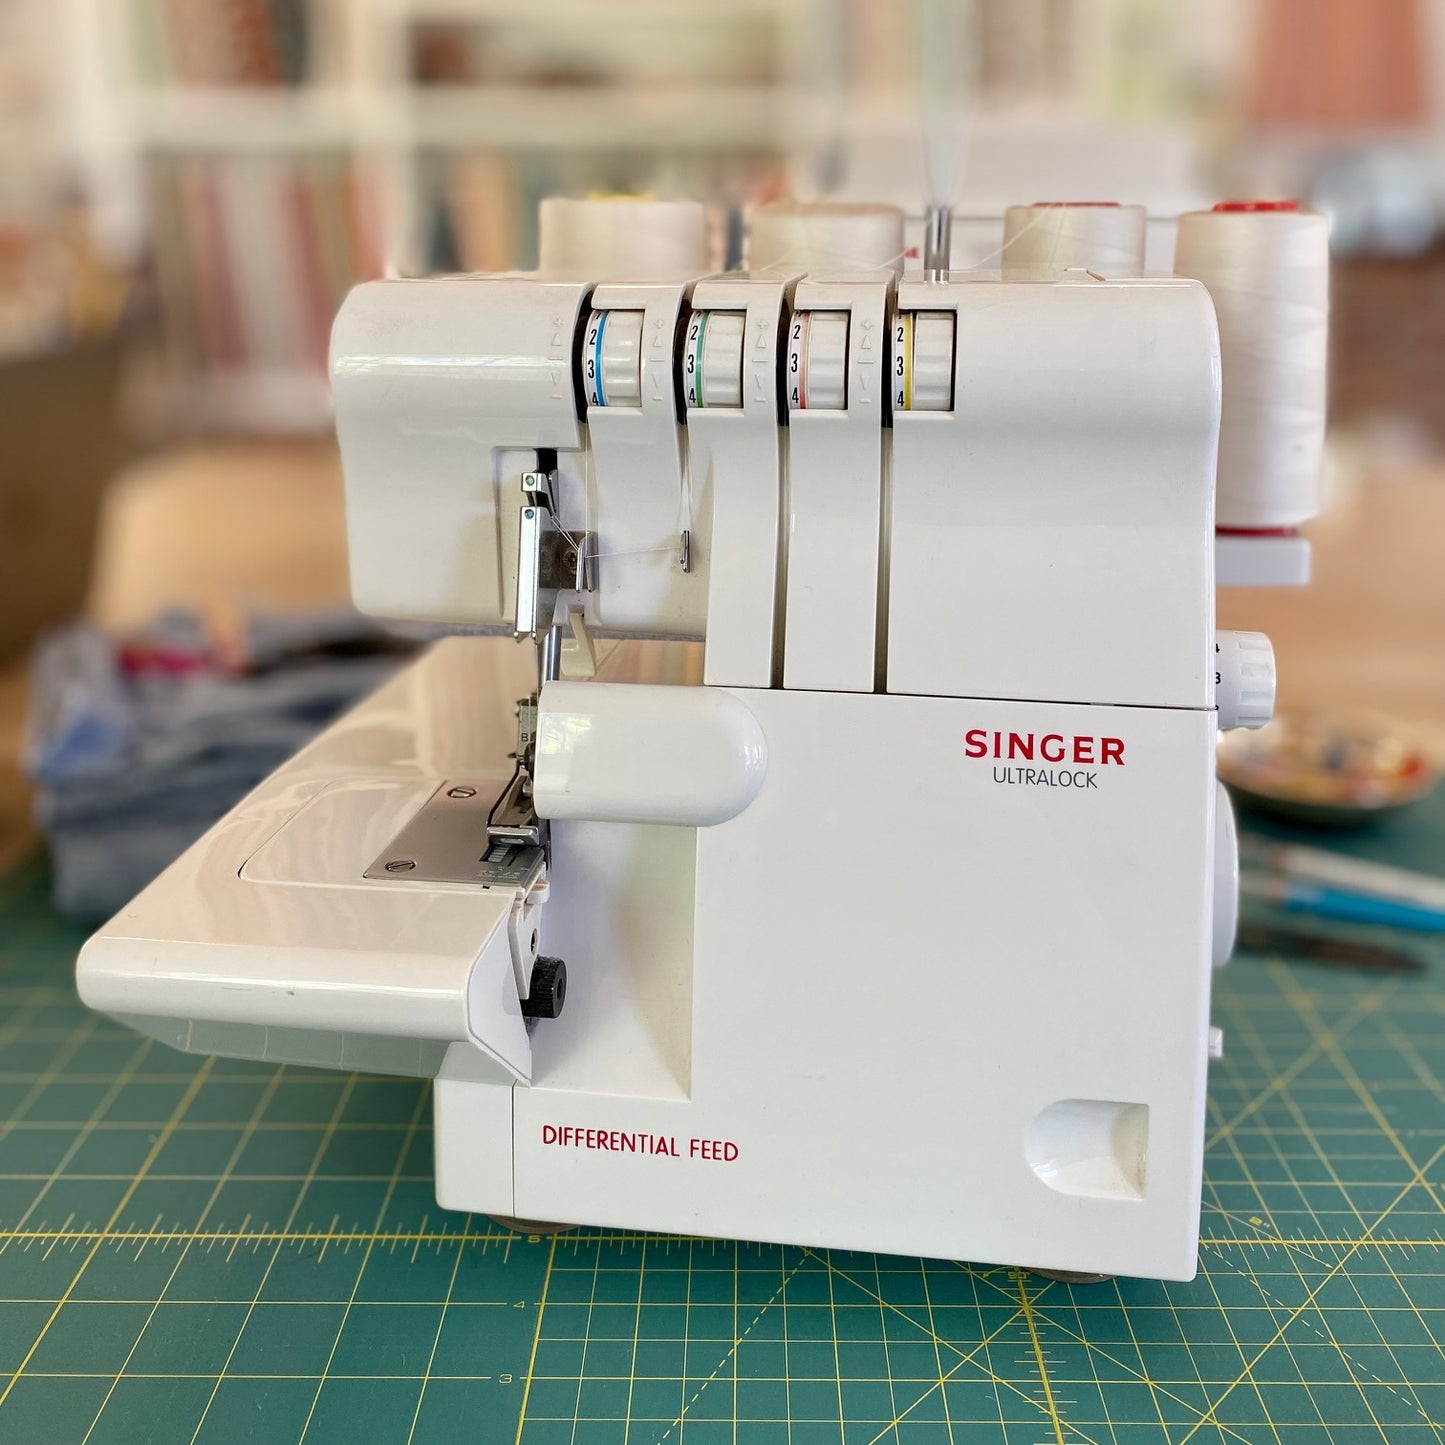 Serger Essentials 101: A hands-on beginners guide how to use your serger, Thursday June 29th, 11:30am - 2:30pm